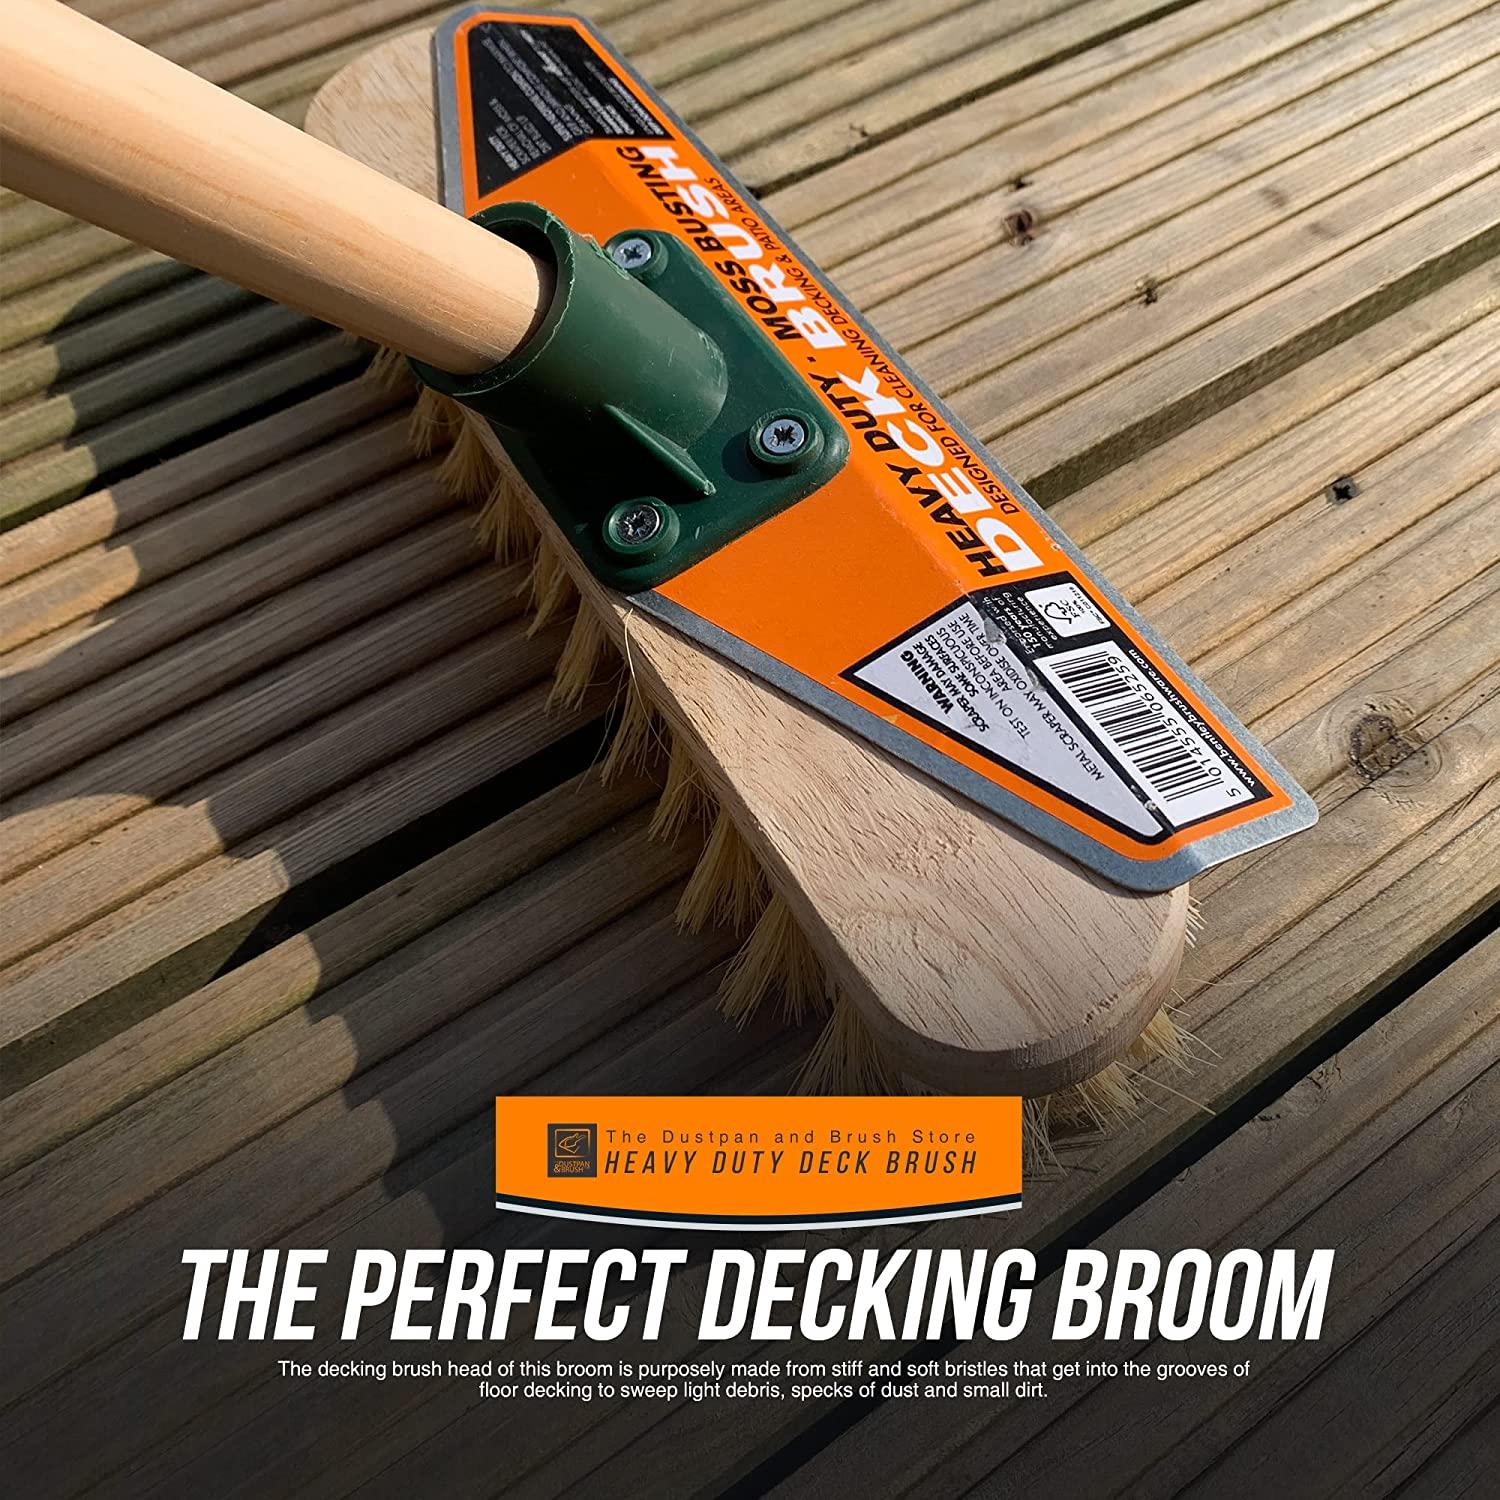 TDBS Decking Castle Brush with Handle